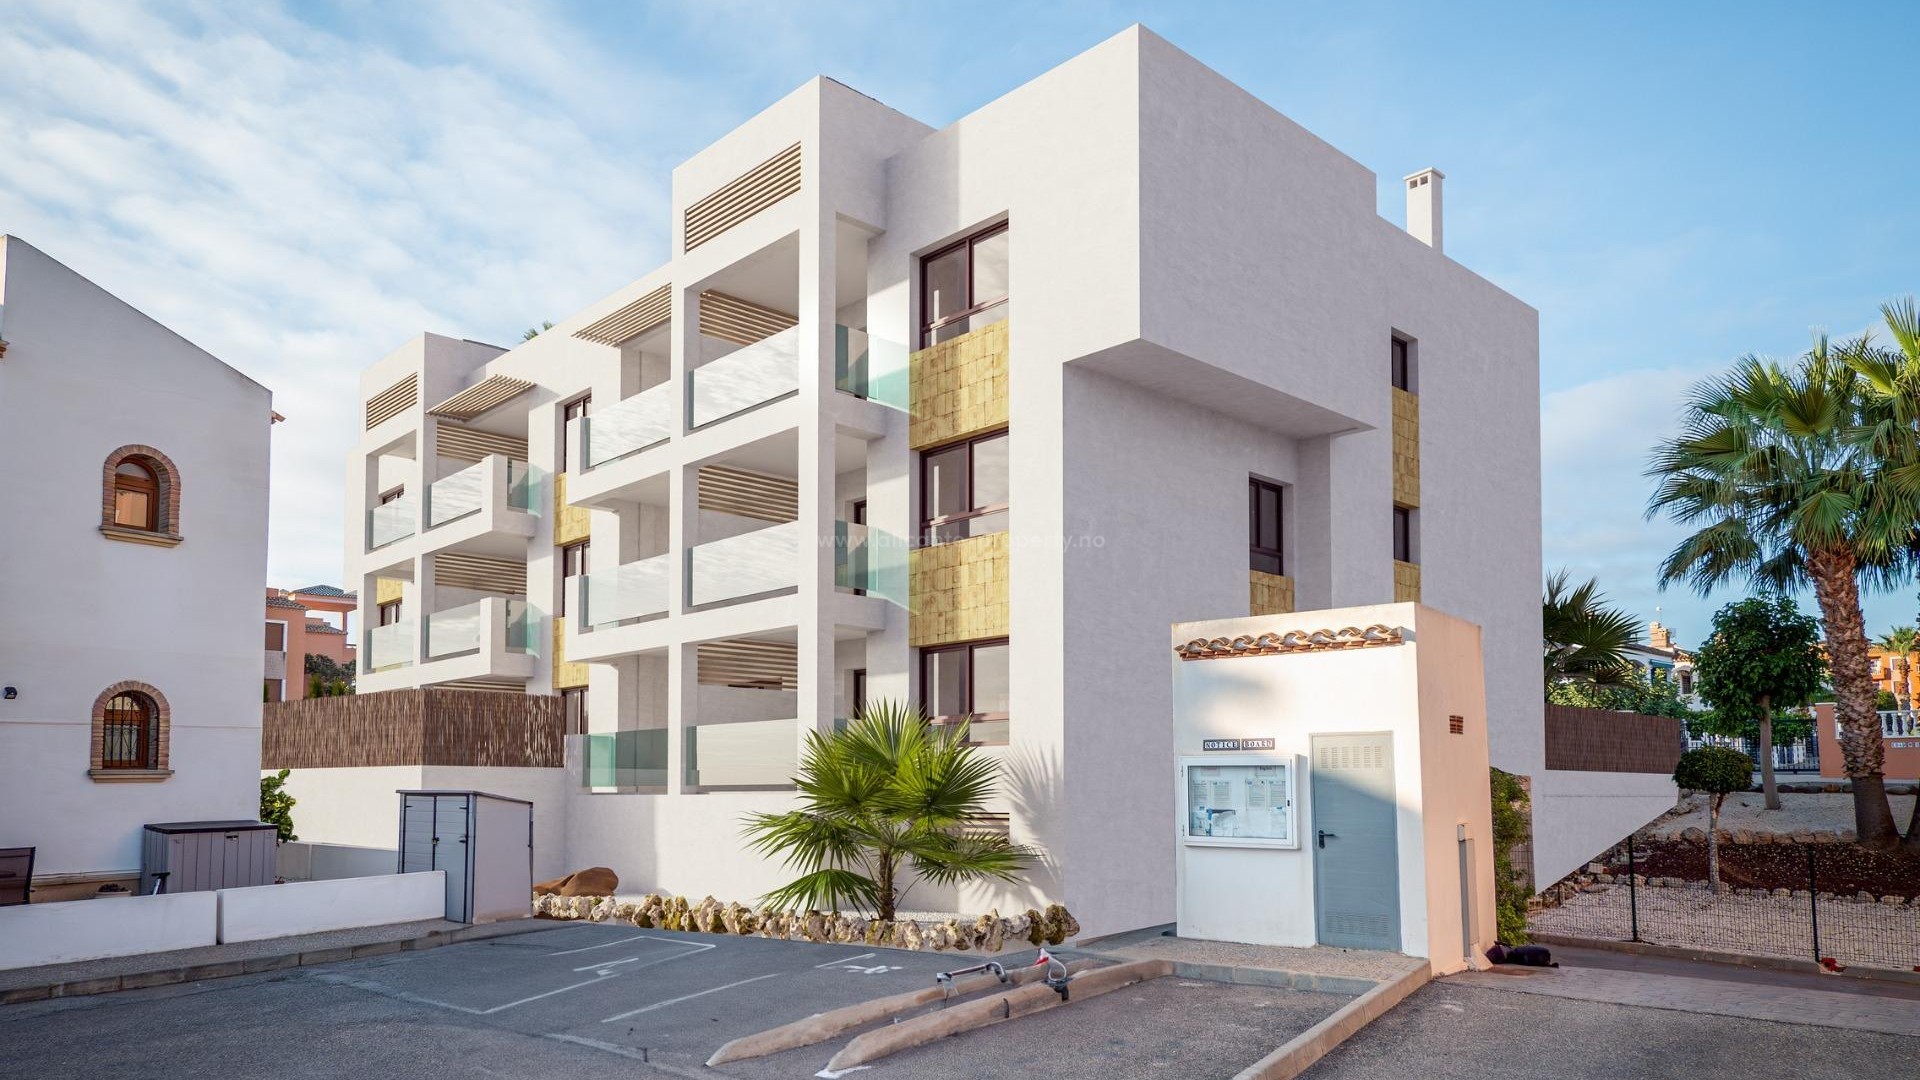 New residential complex in Orihuela Costa, 2 bedrooms, 2 bathrooms, terraces, penthouses with sun terraces with fantastic views